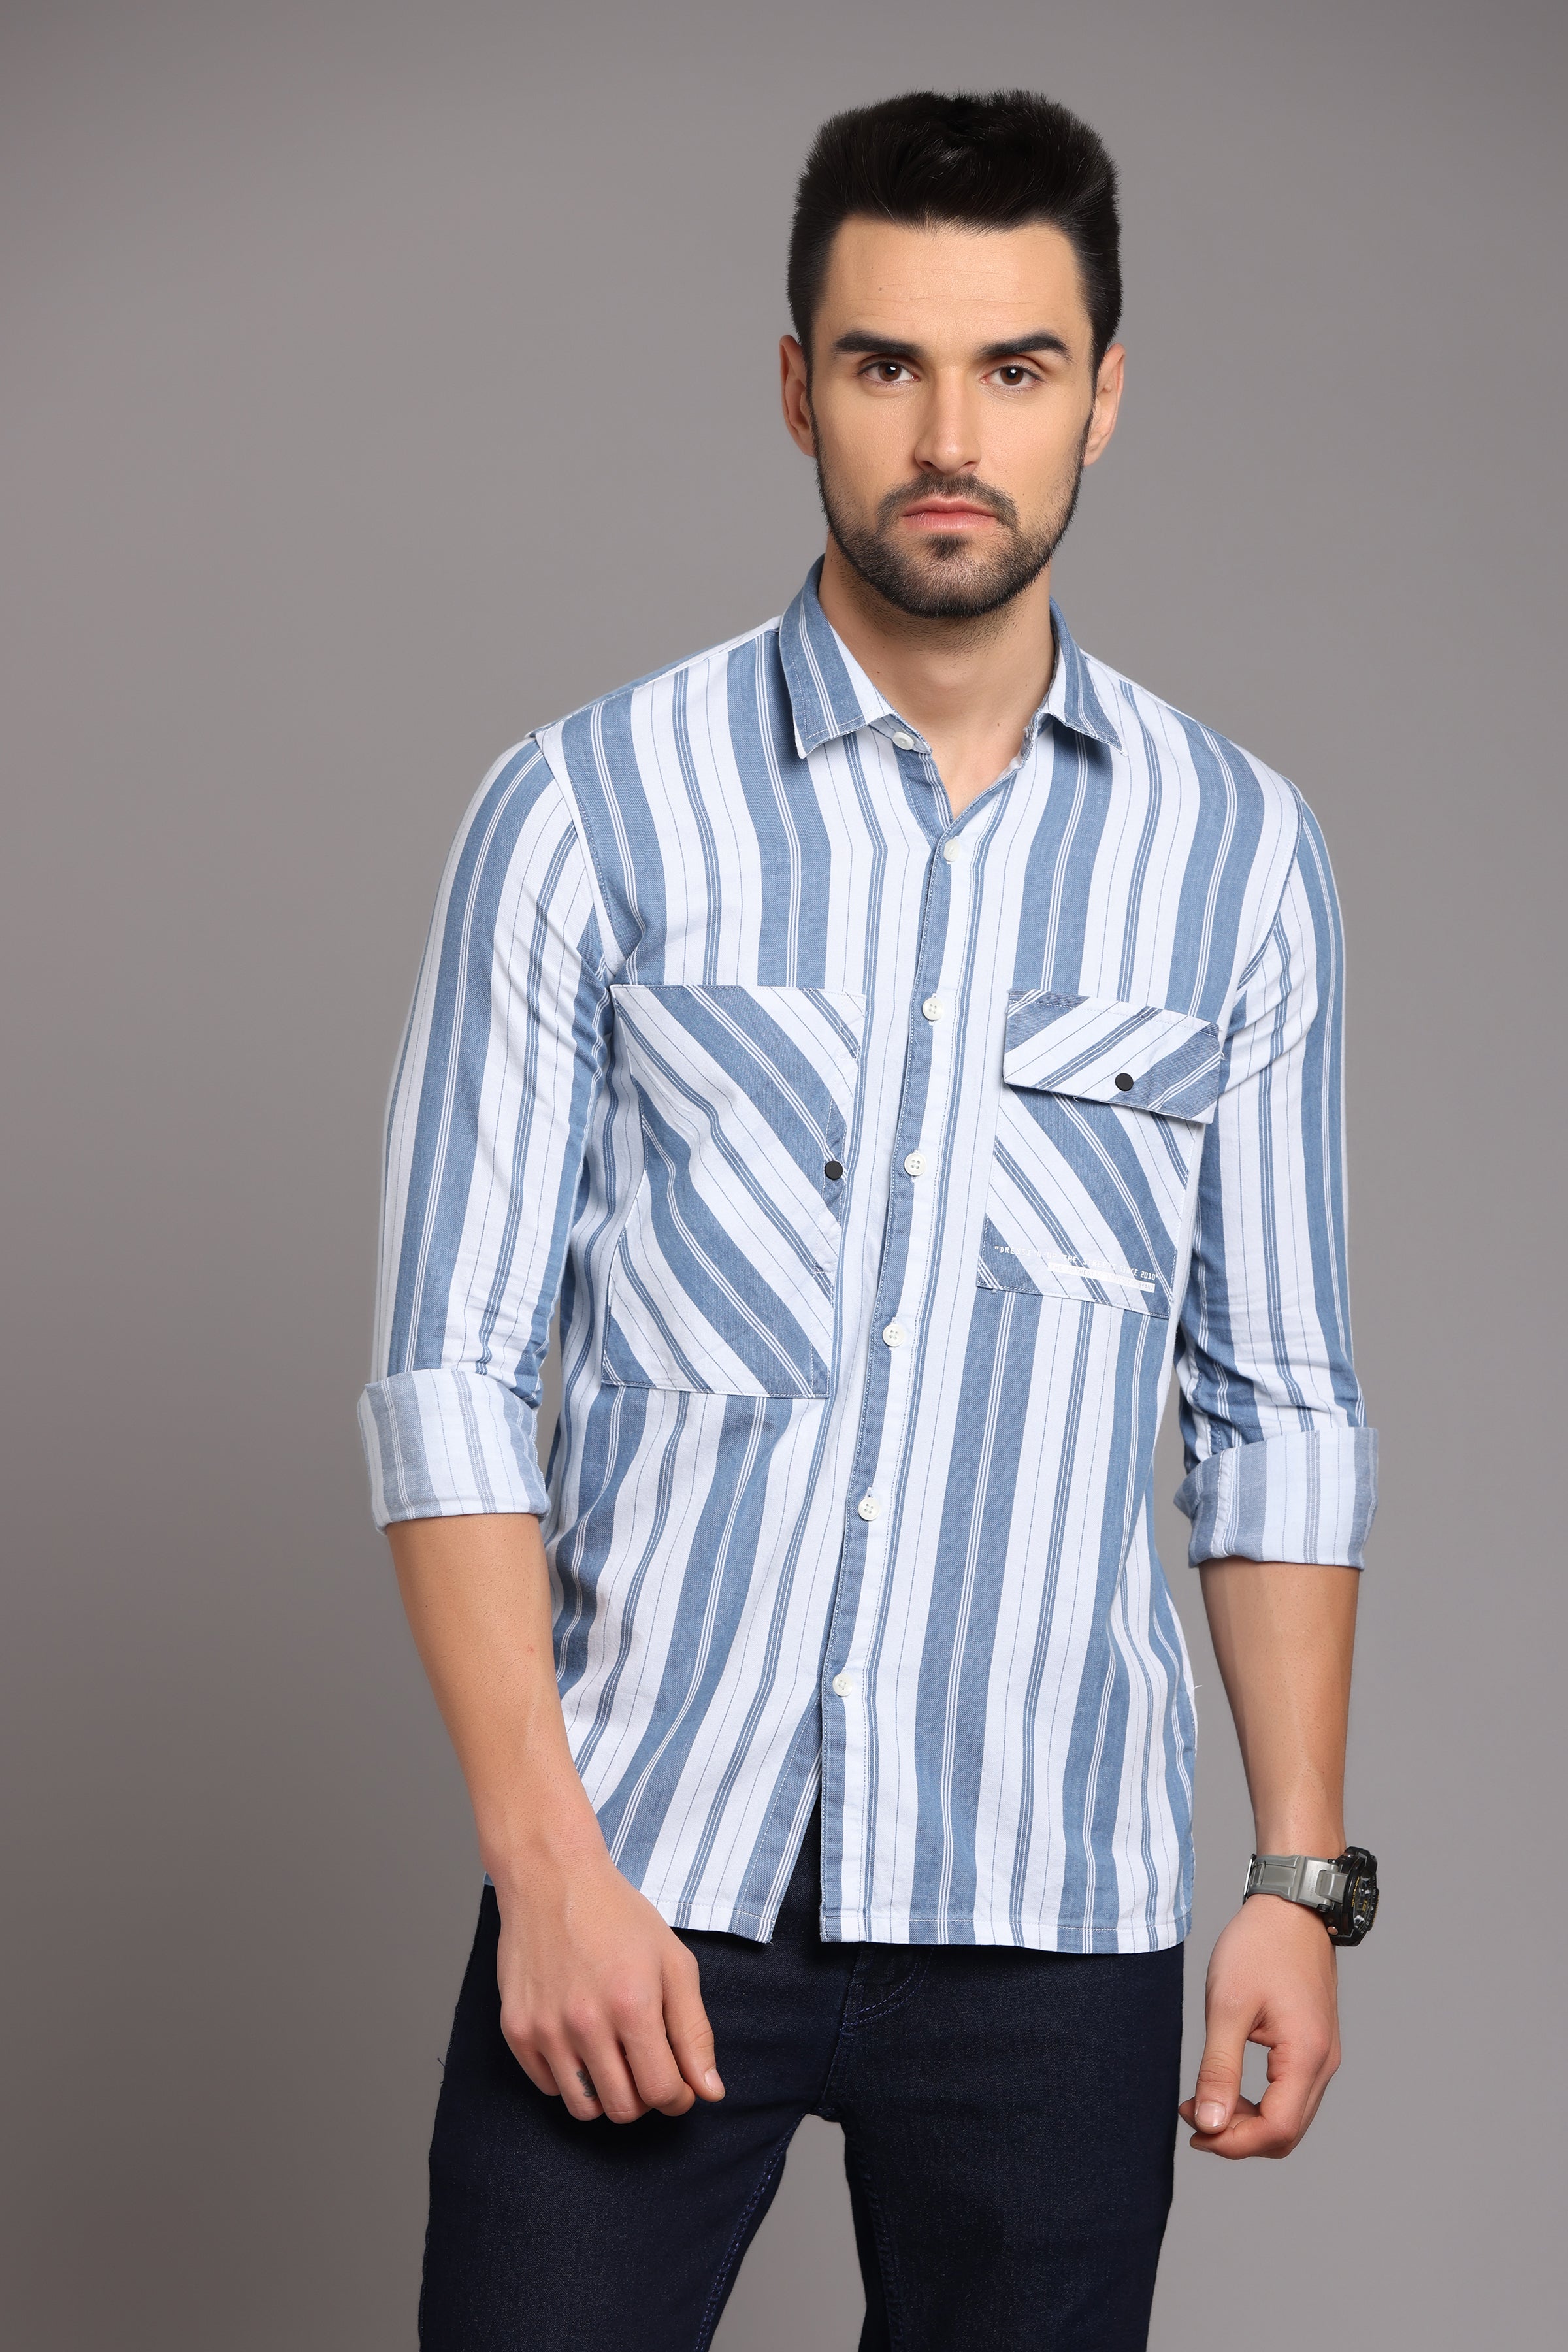 Blue and White Striped Full Sleeve Shirt Shirts Project 30 S 